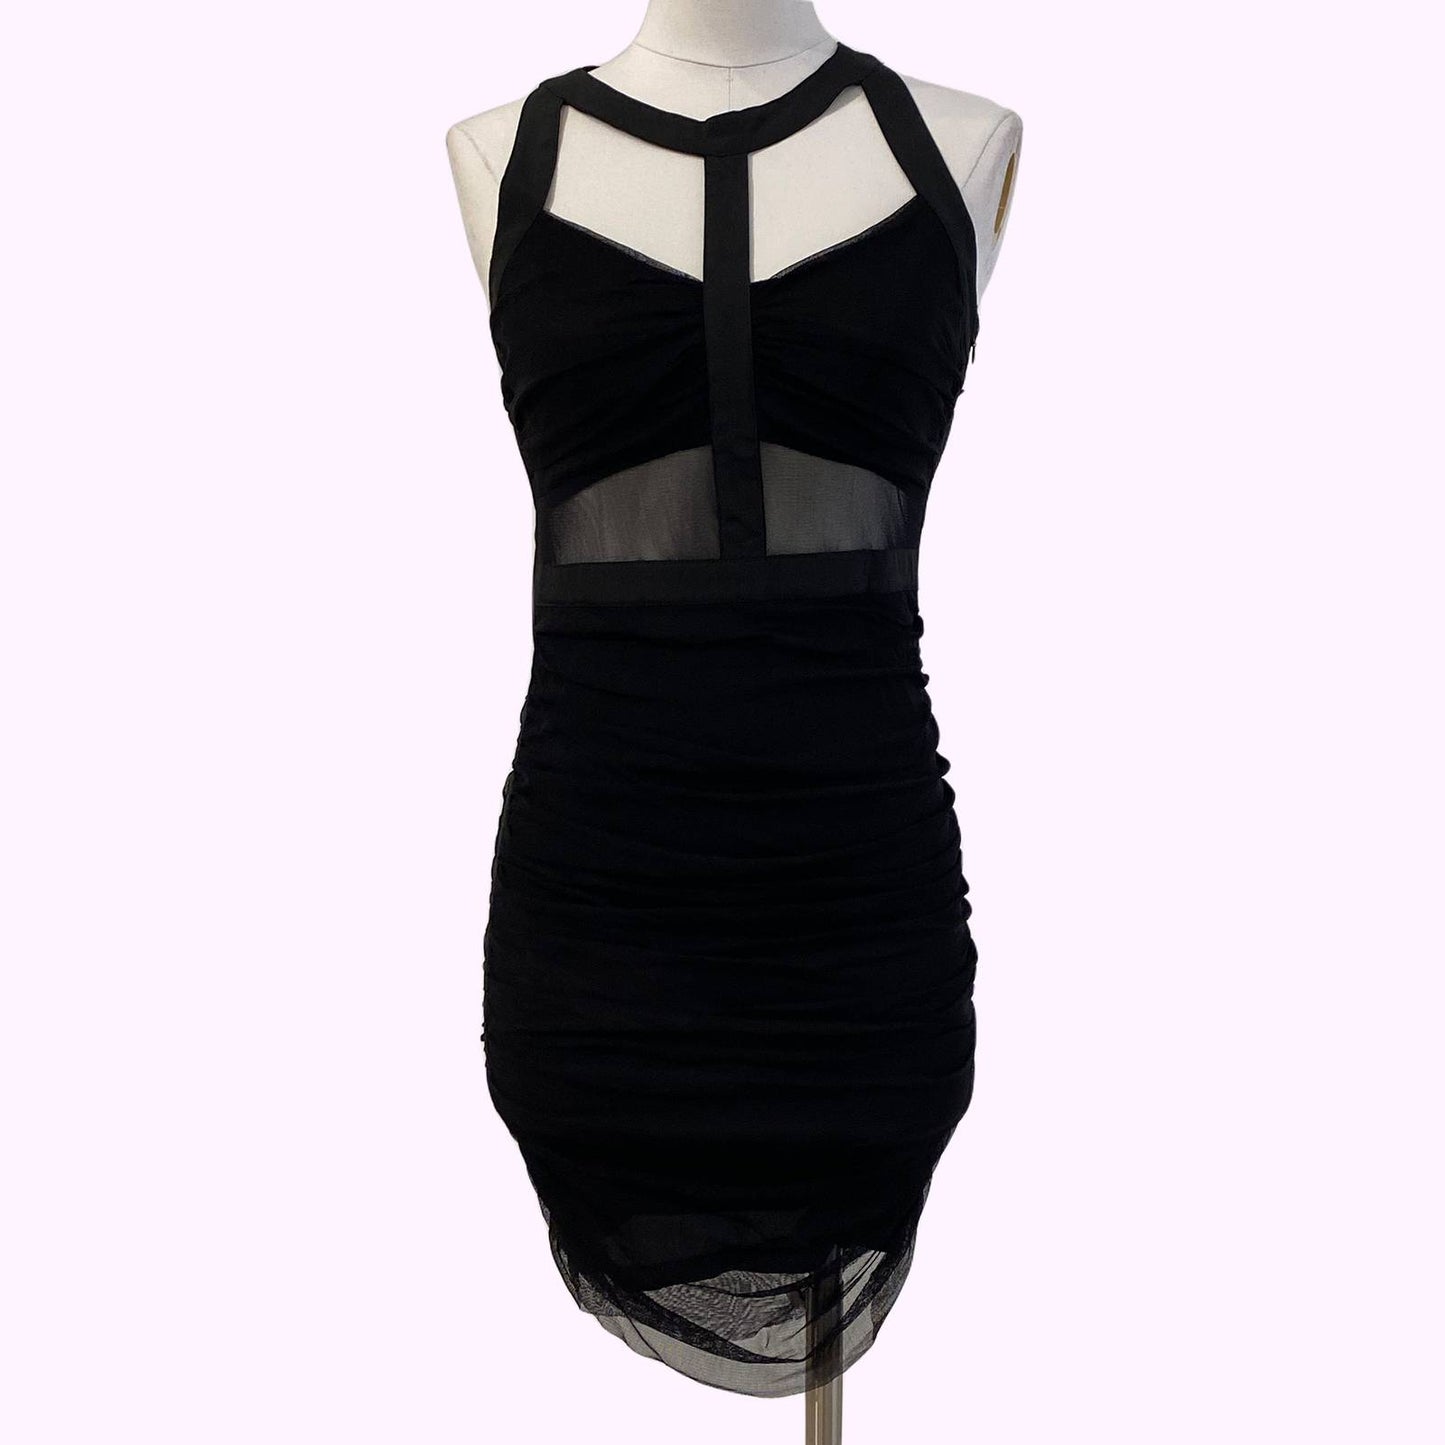 LOVEY DOVEY Black Bodycon Cut Out Dress with Mesh Details